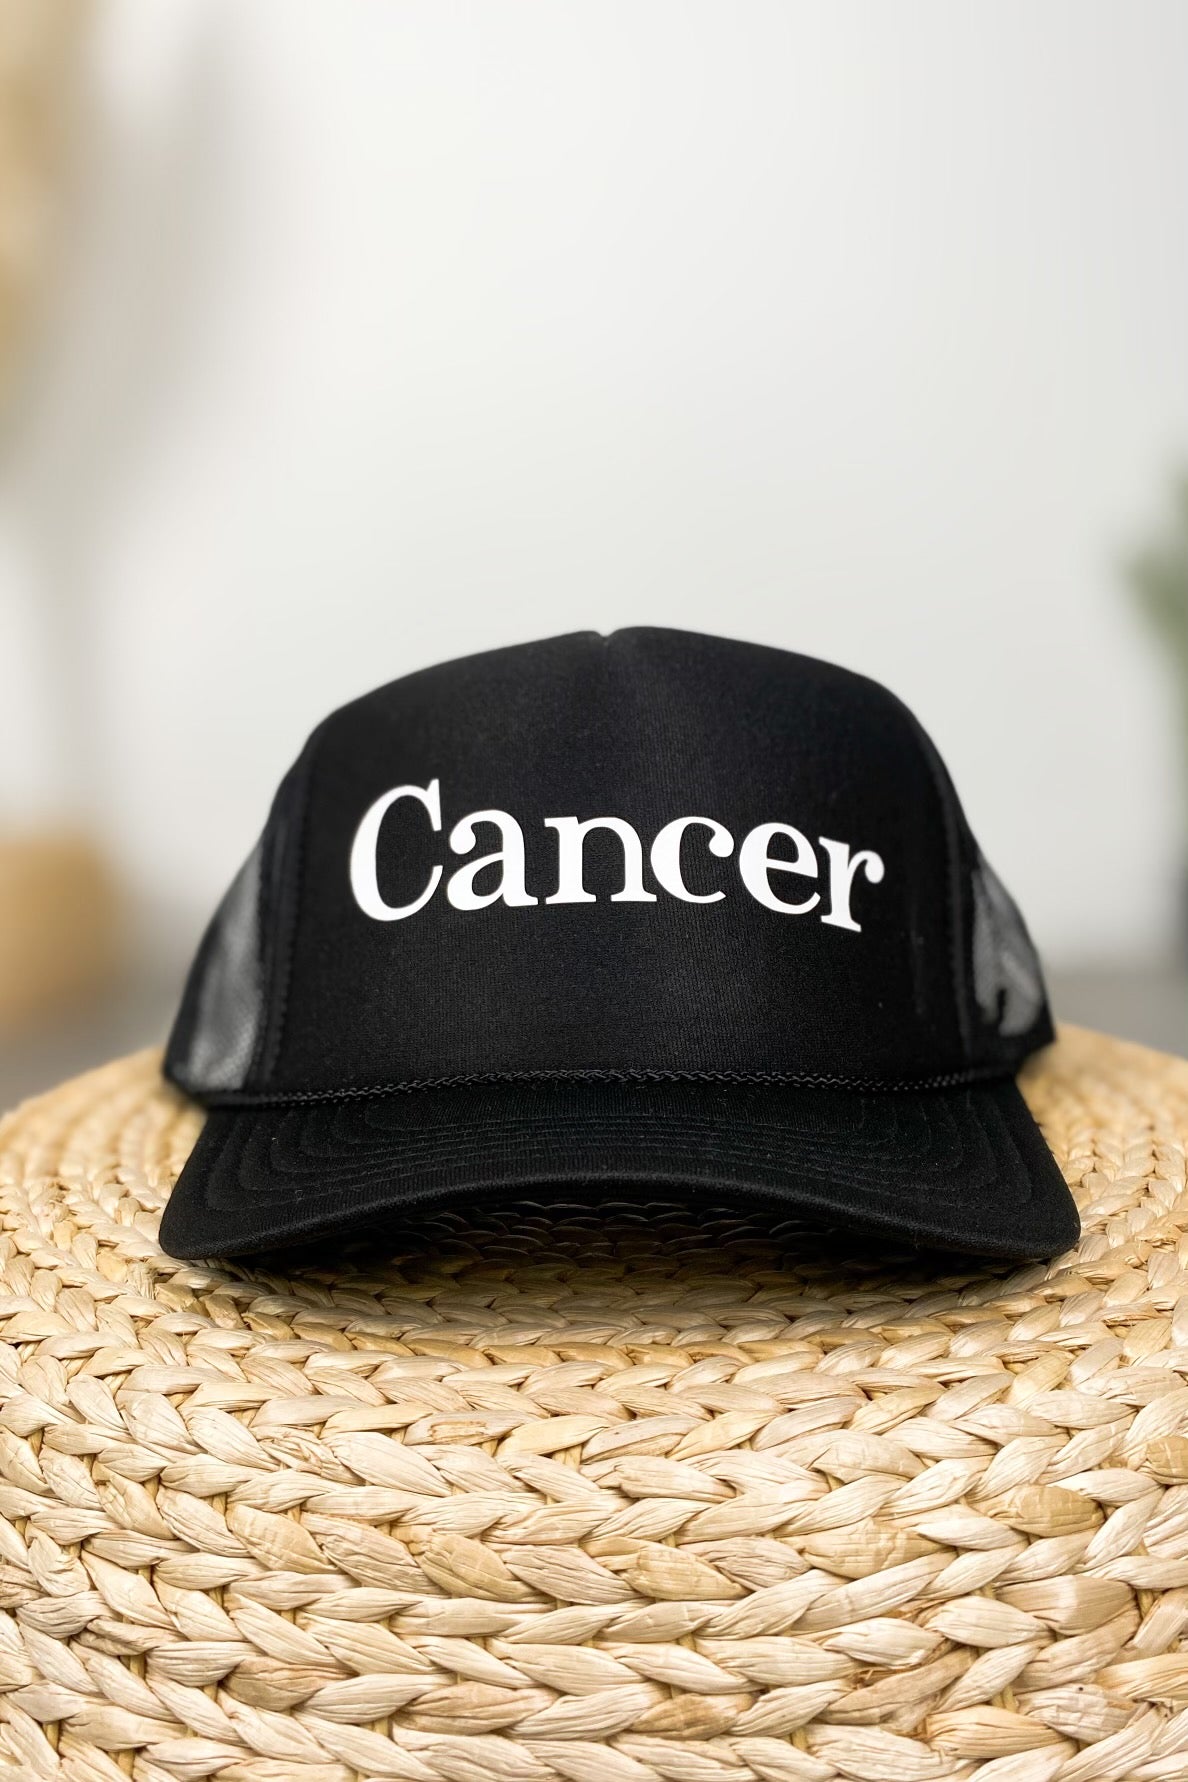 Cancer trucker hat black - Trendy Hats at Lush Fashion Lounge Boutique in Oklahoma City